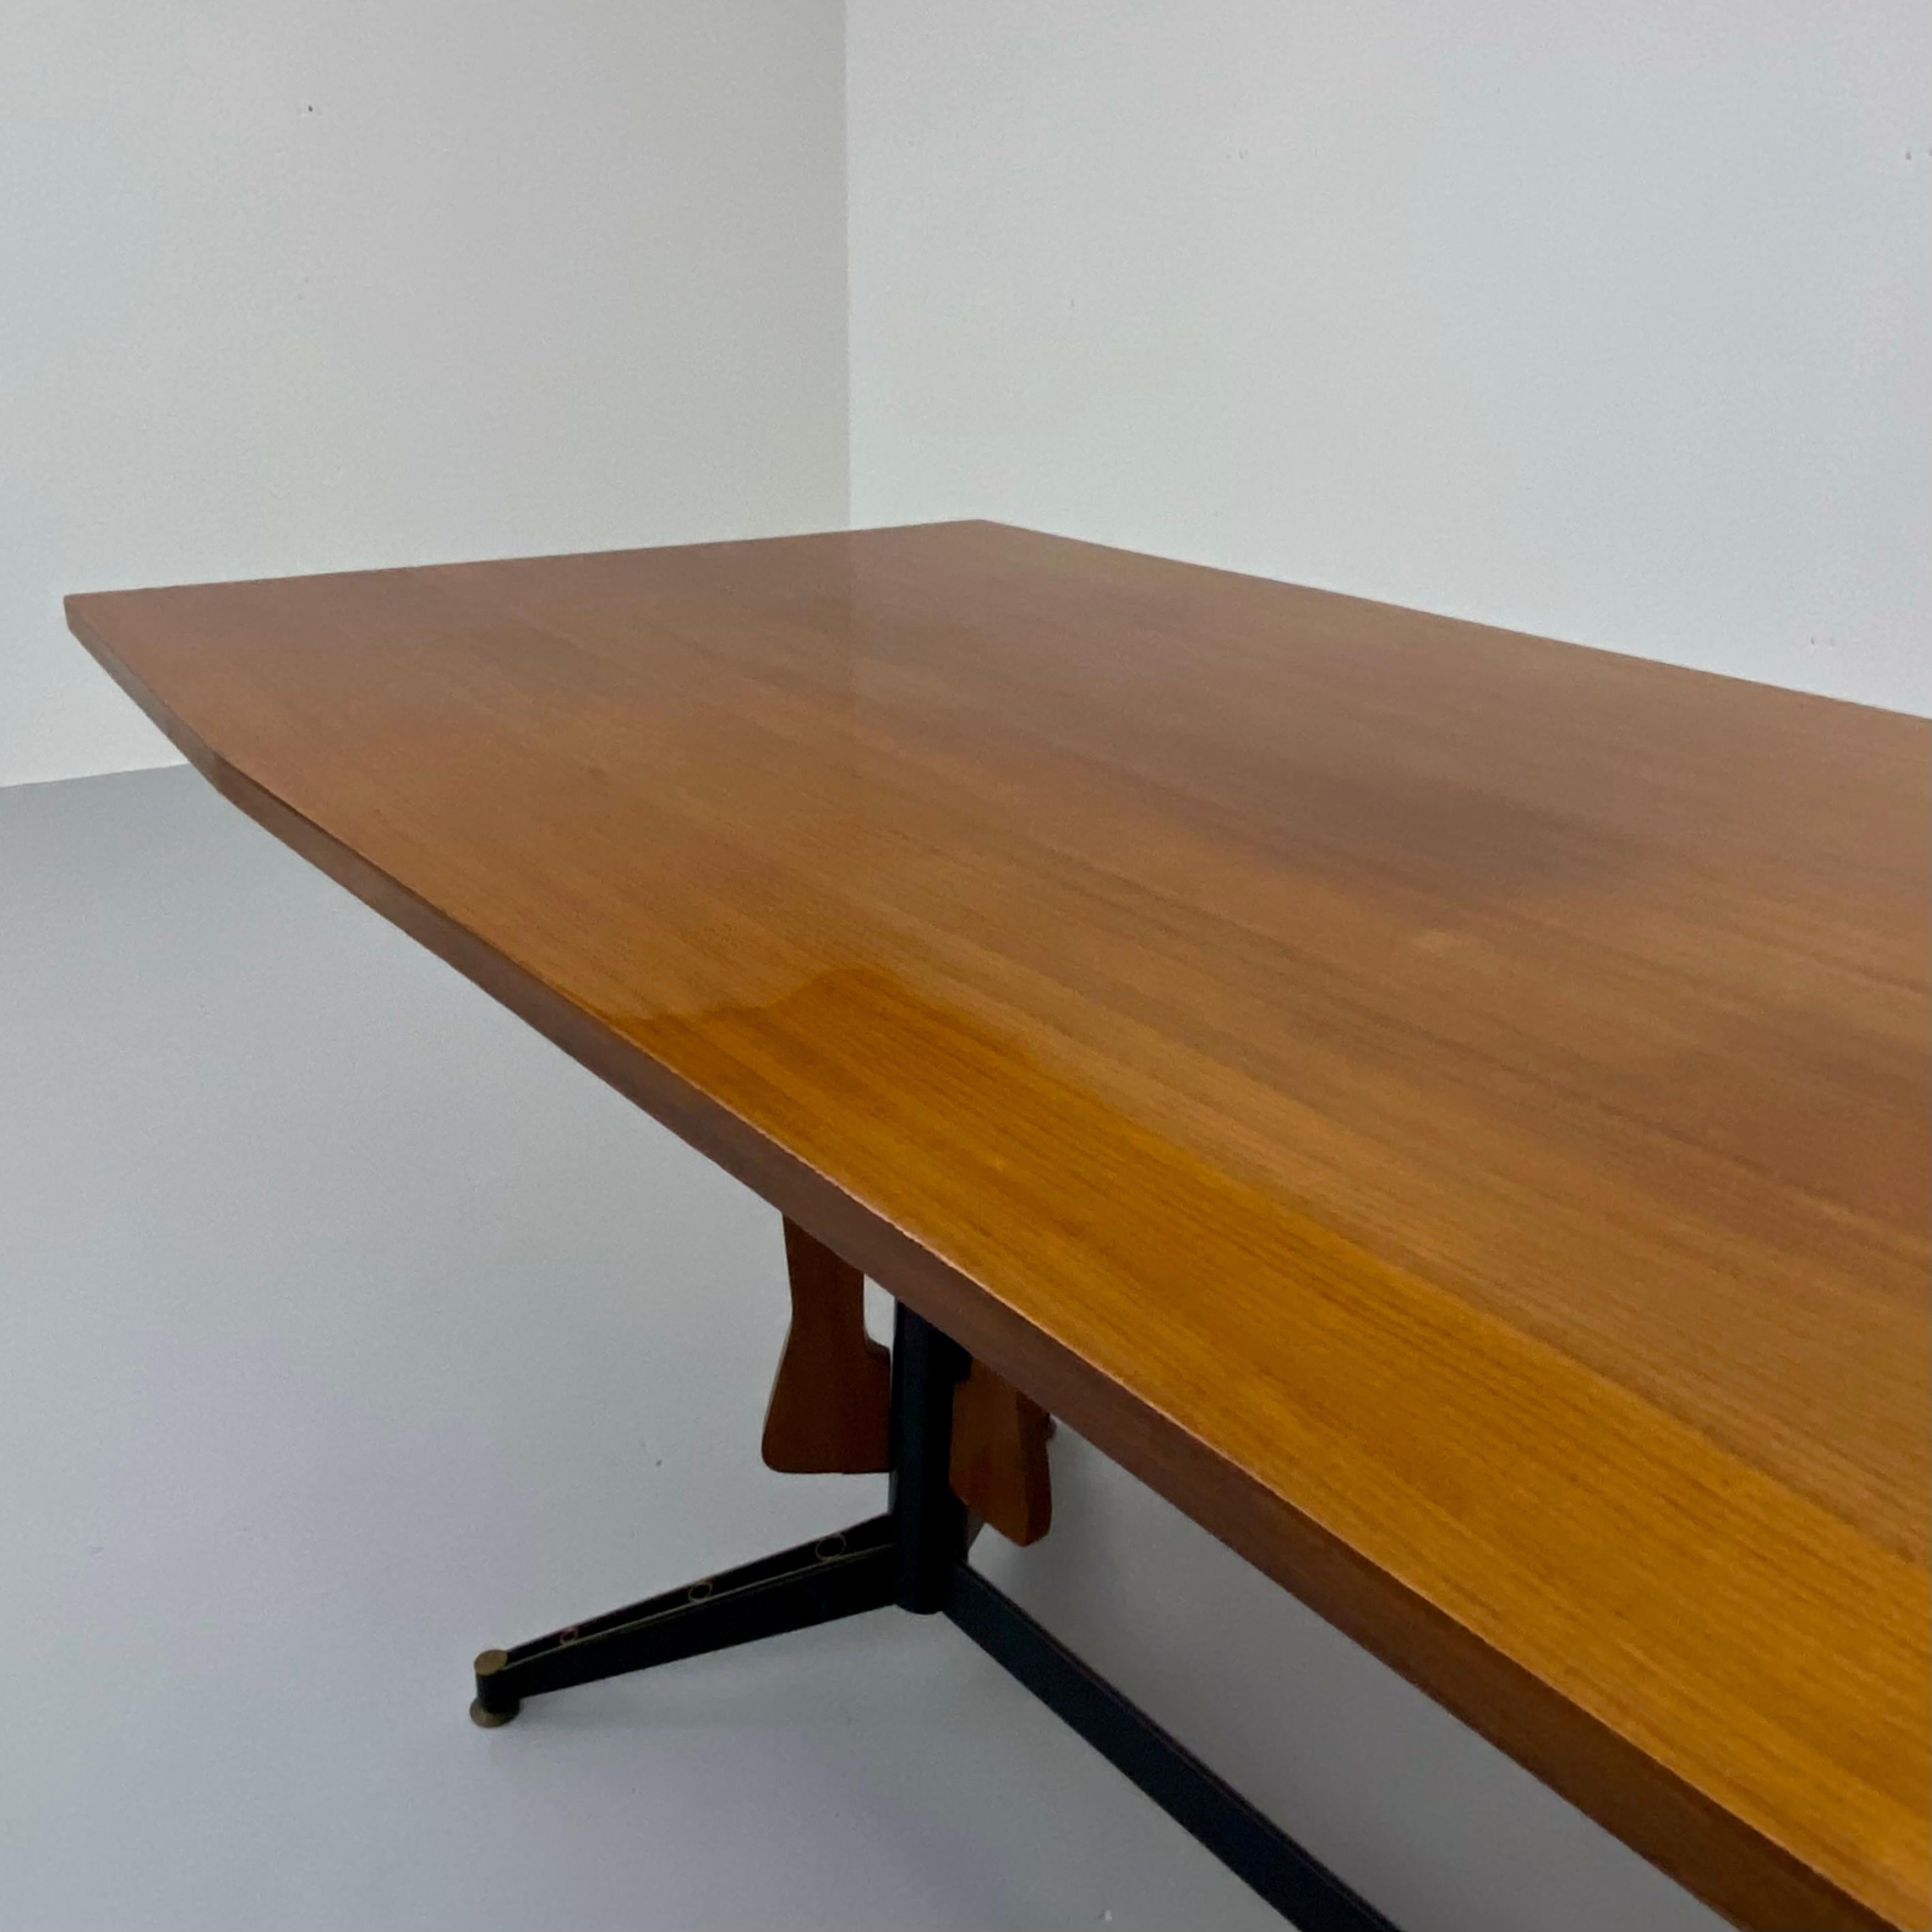 Italian Carlo Ratti Dining Table in Wood and Metal, Italy, 1960's For Sale